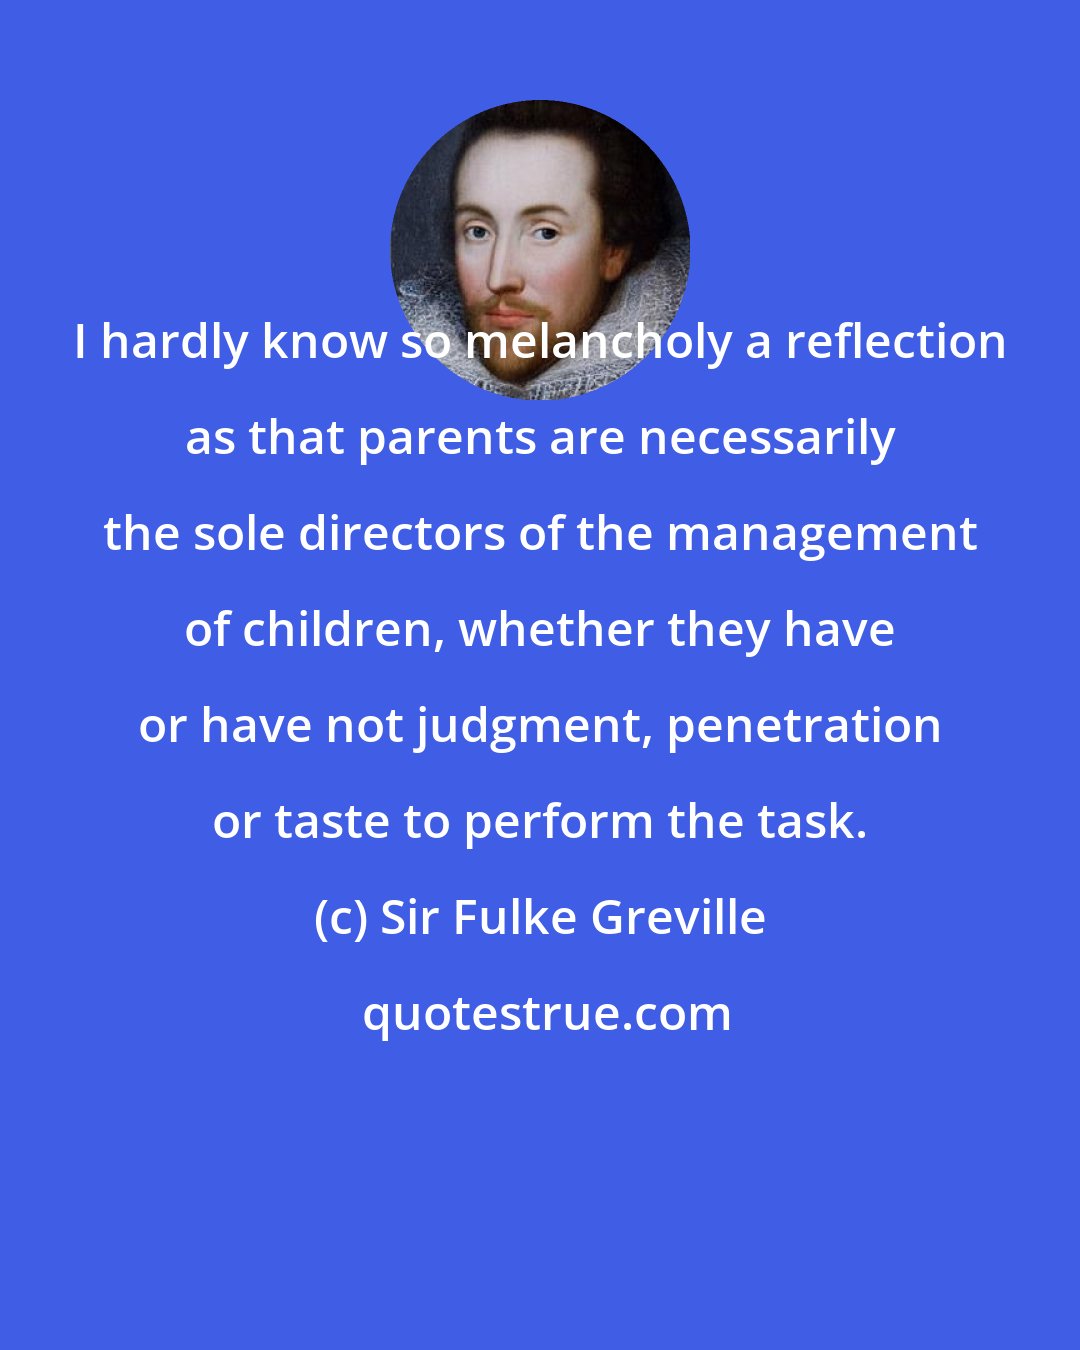 Sir Fulke Greville: I hardly know so melancholy a reflection as that parents are necessarily the sole directors of the management of children, whether they have or have not judgment, penetration or taste to perform the task.